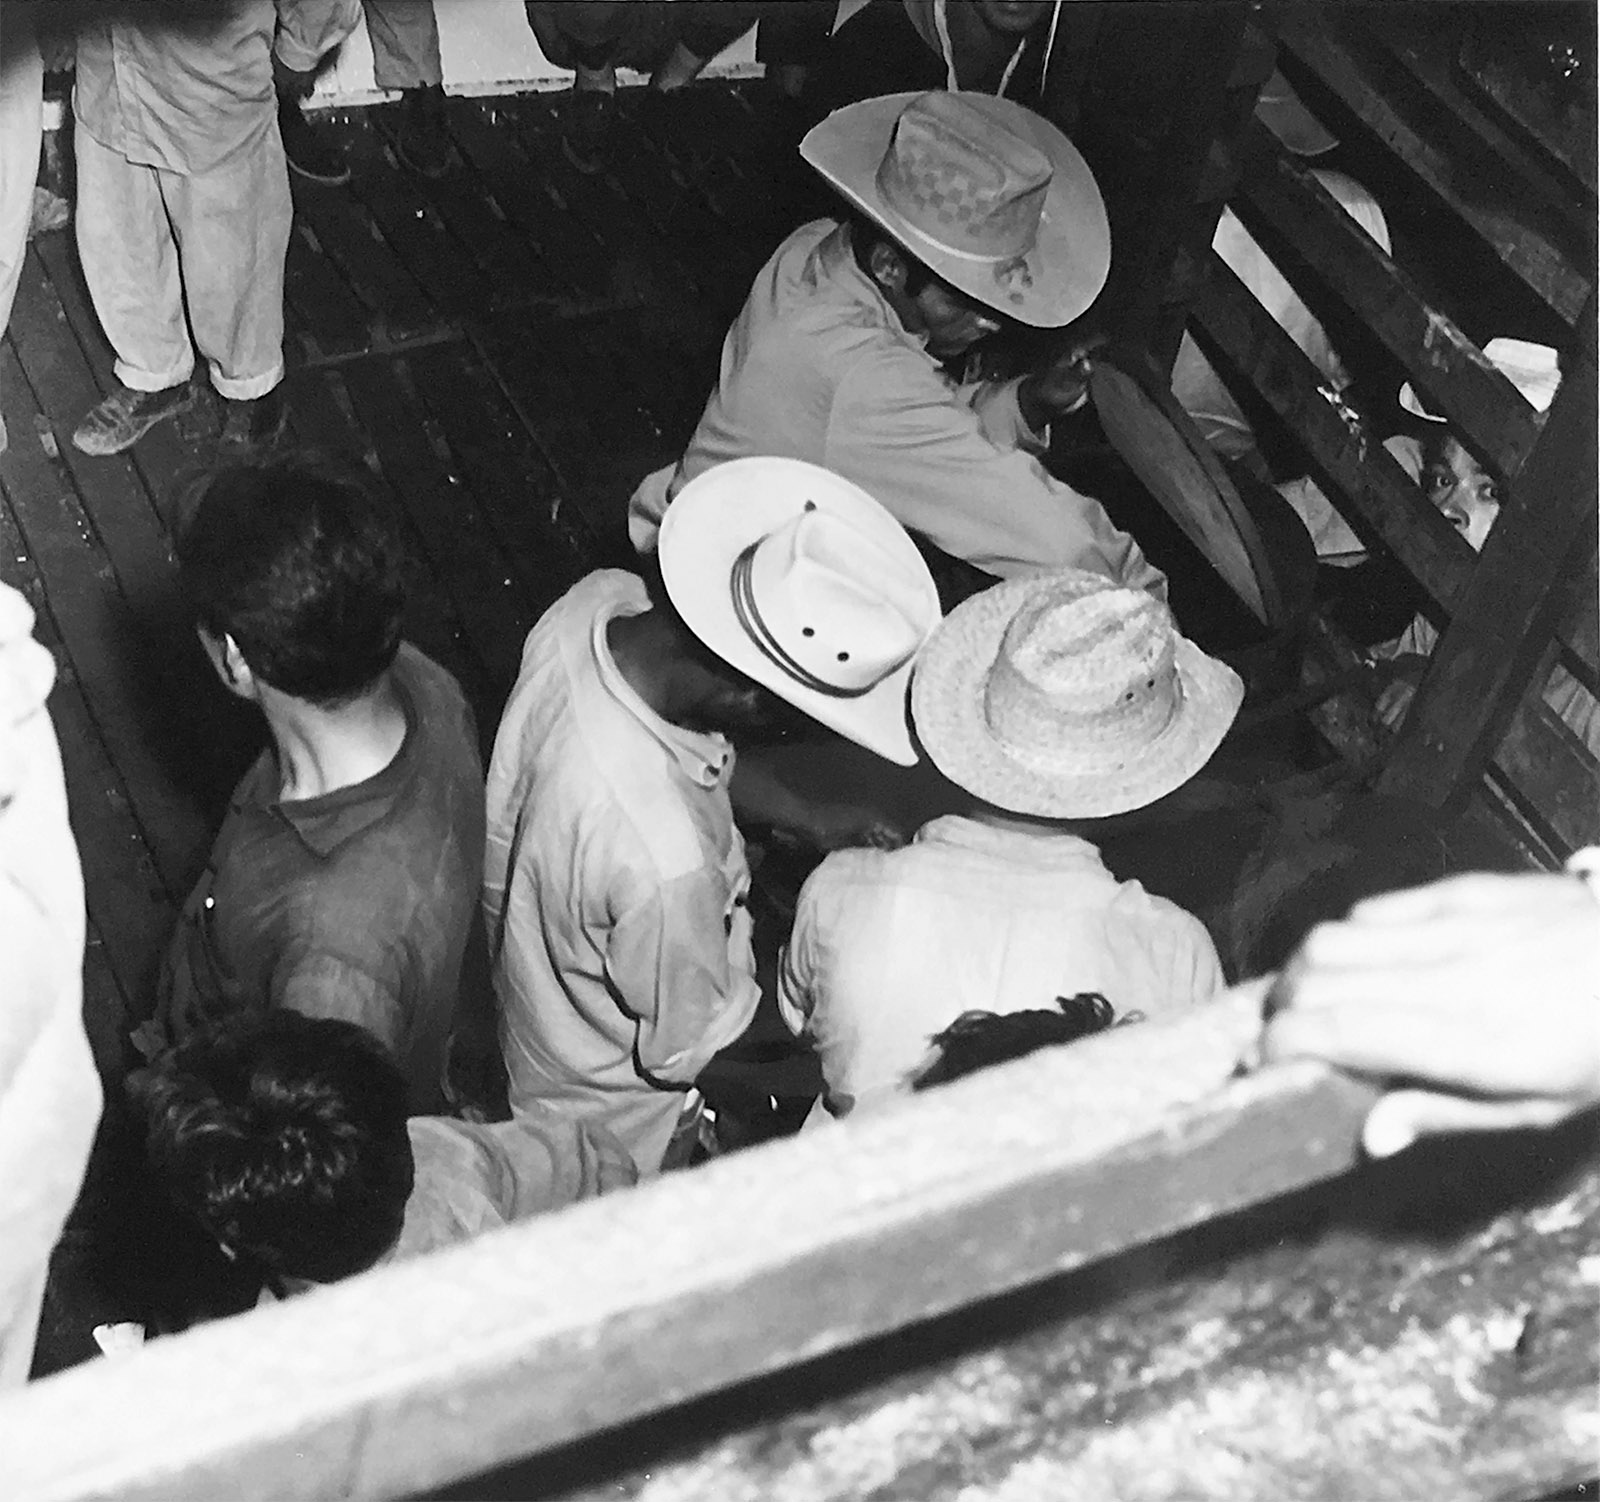 Mexican deportees on the SS Mercurio